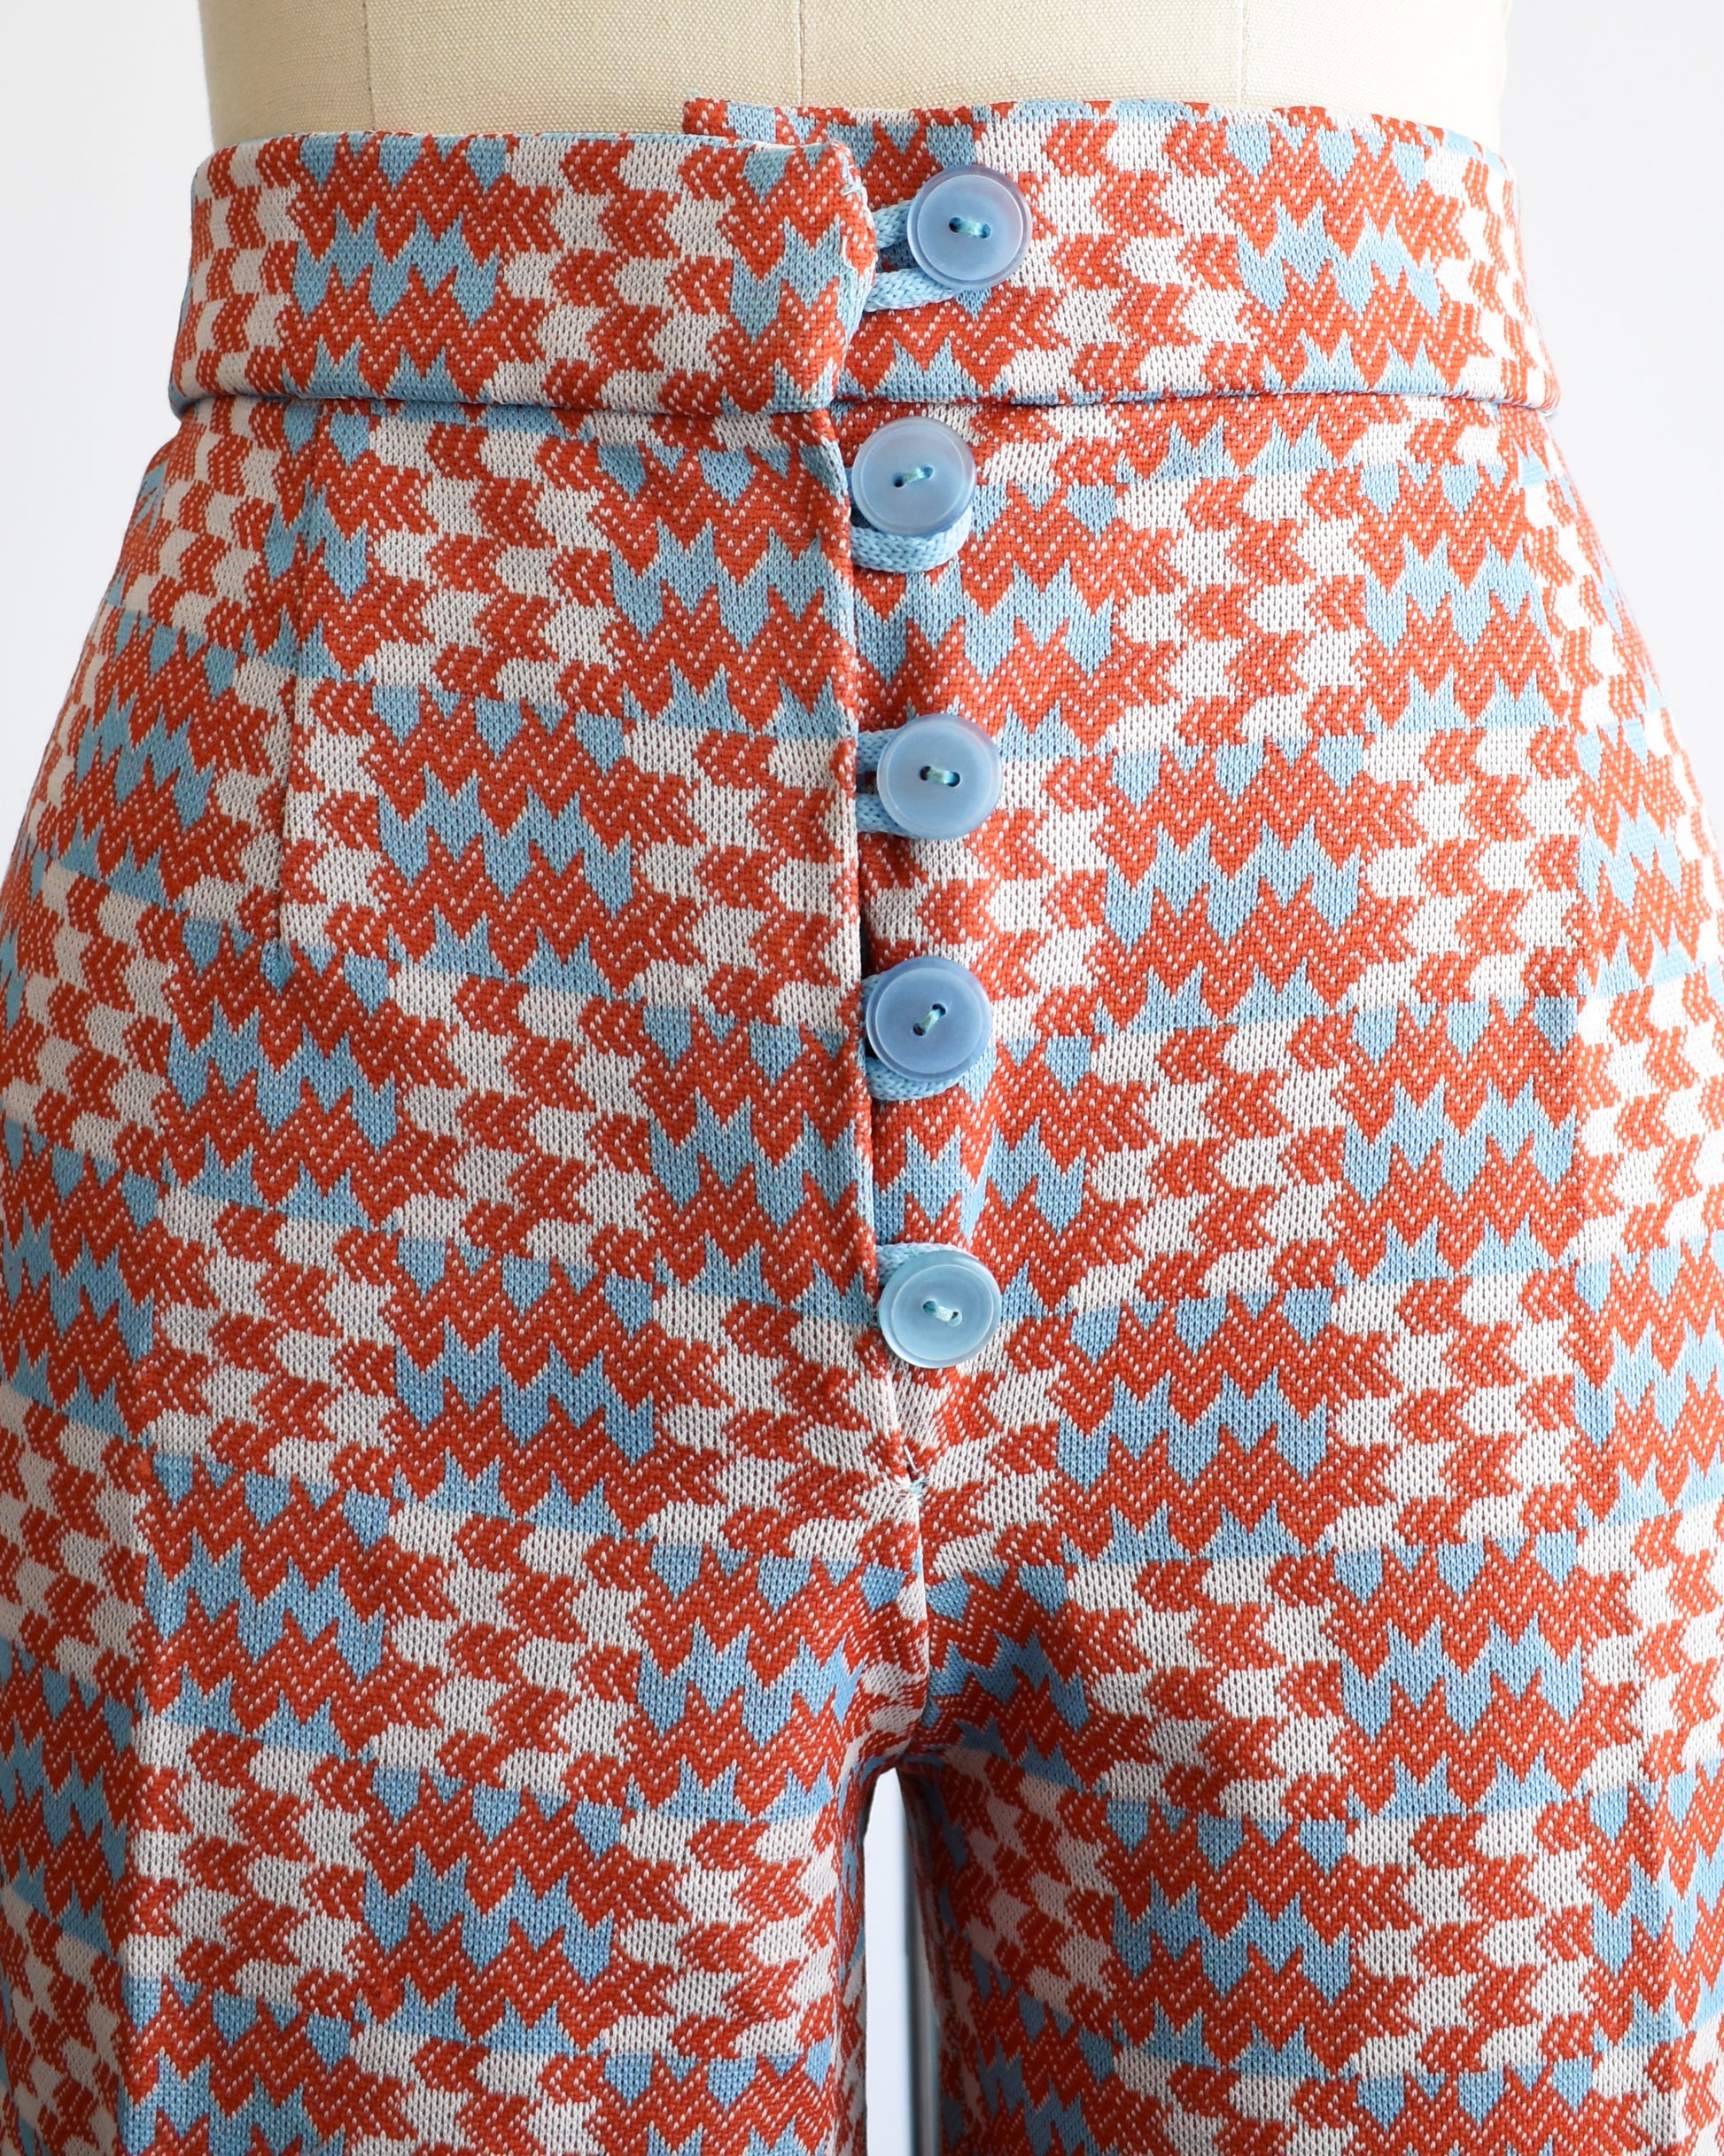 close up of the a pair of  vintage 1970s wide leg pants feature a vibrant print with dark orange, white, and light blue arrows pointing in various directions down the legs. The pants have 4 light blue buttons on the front